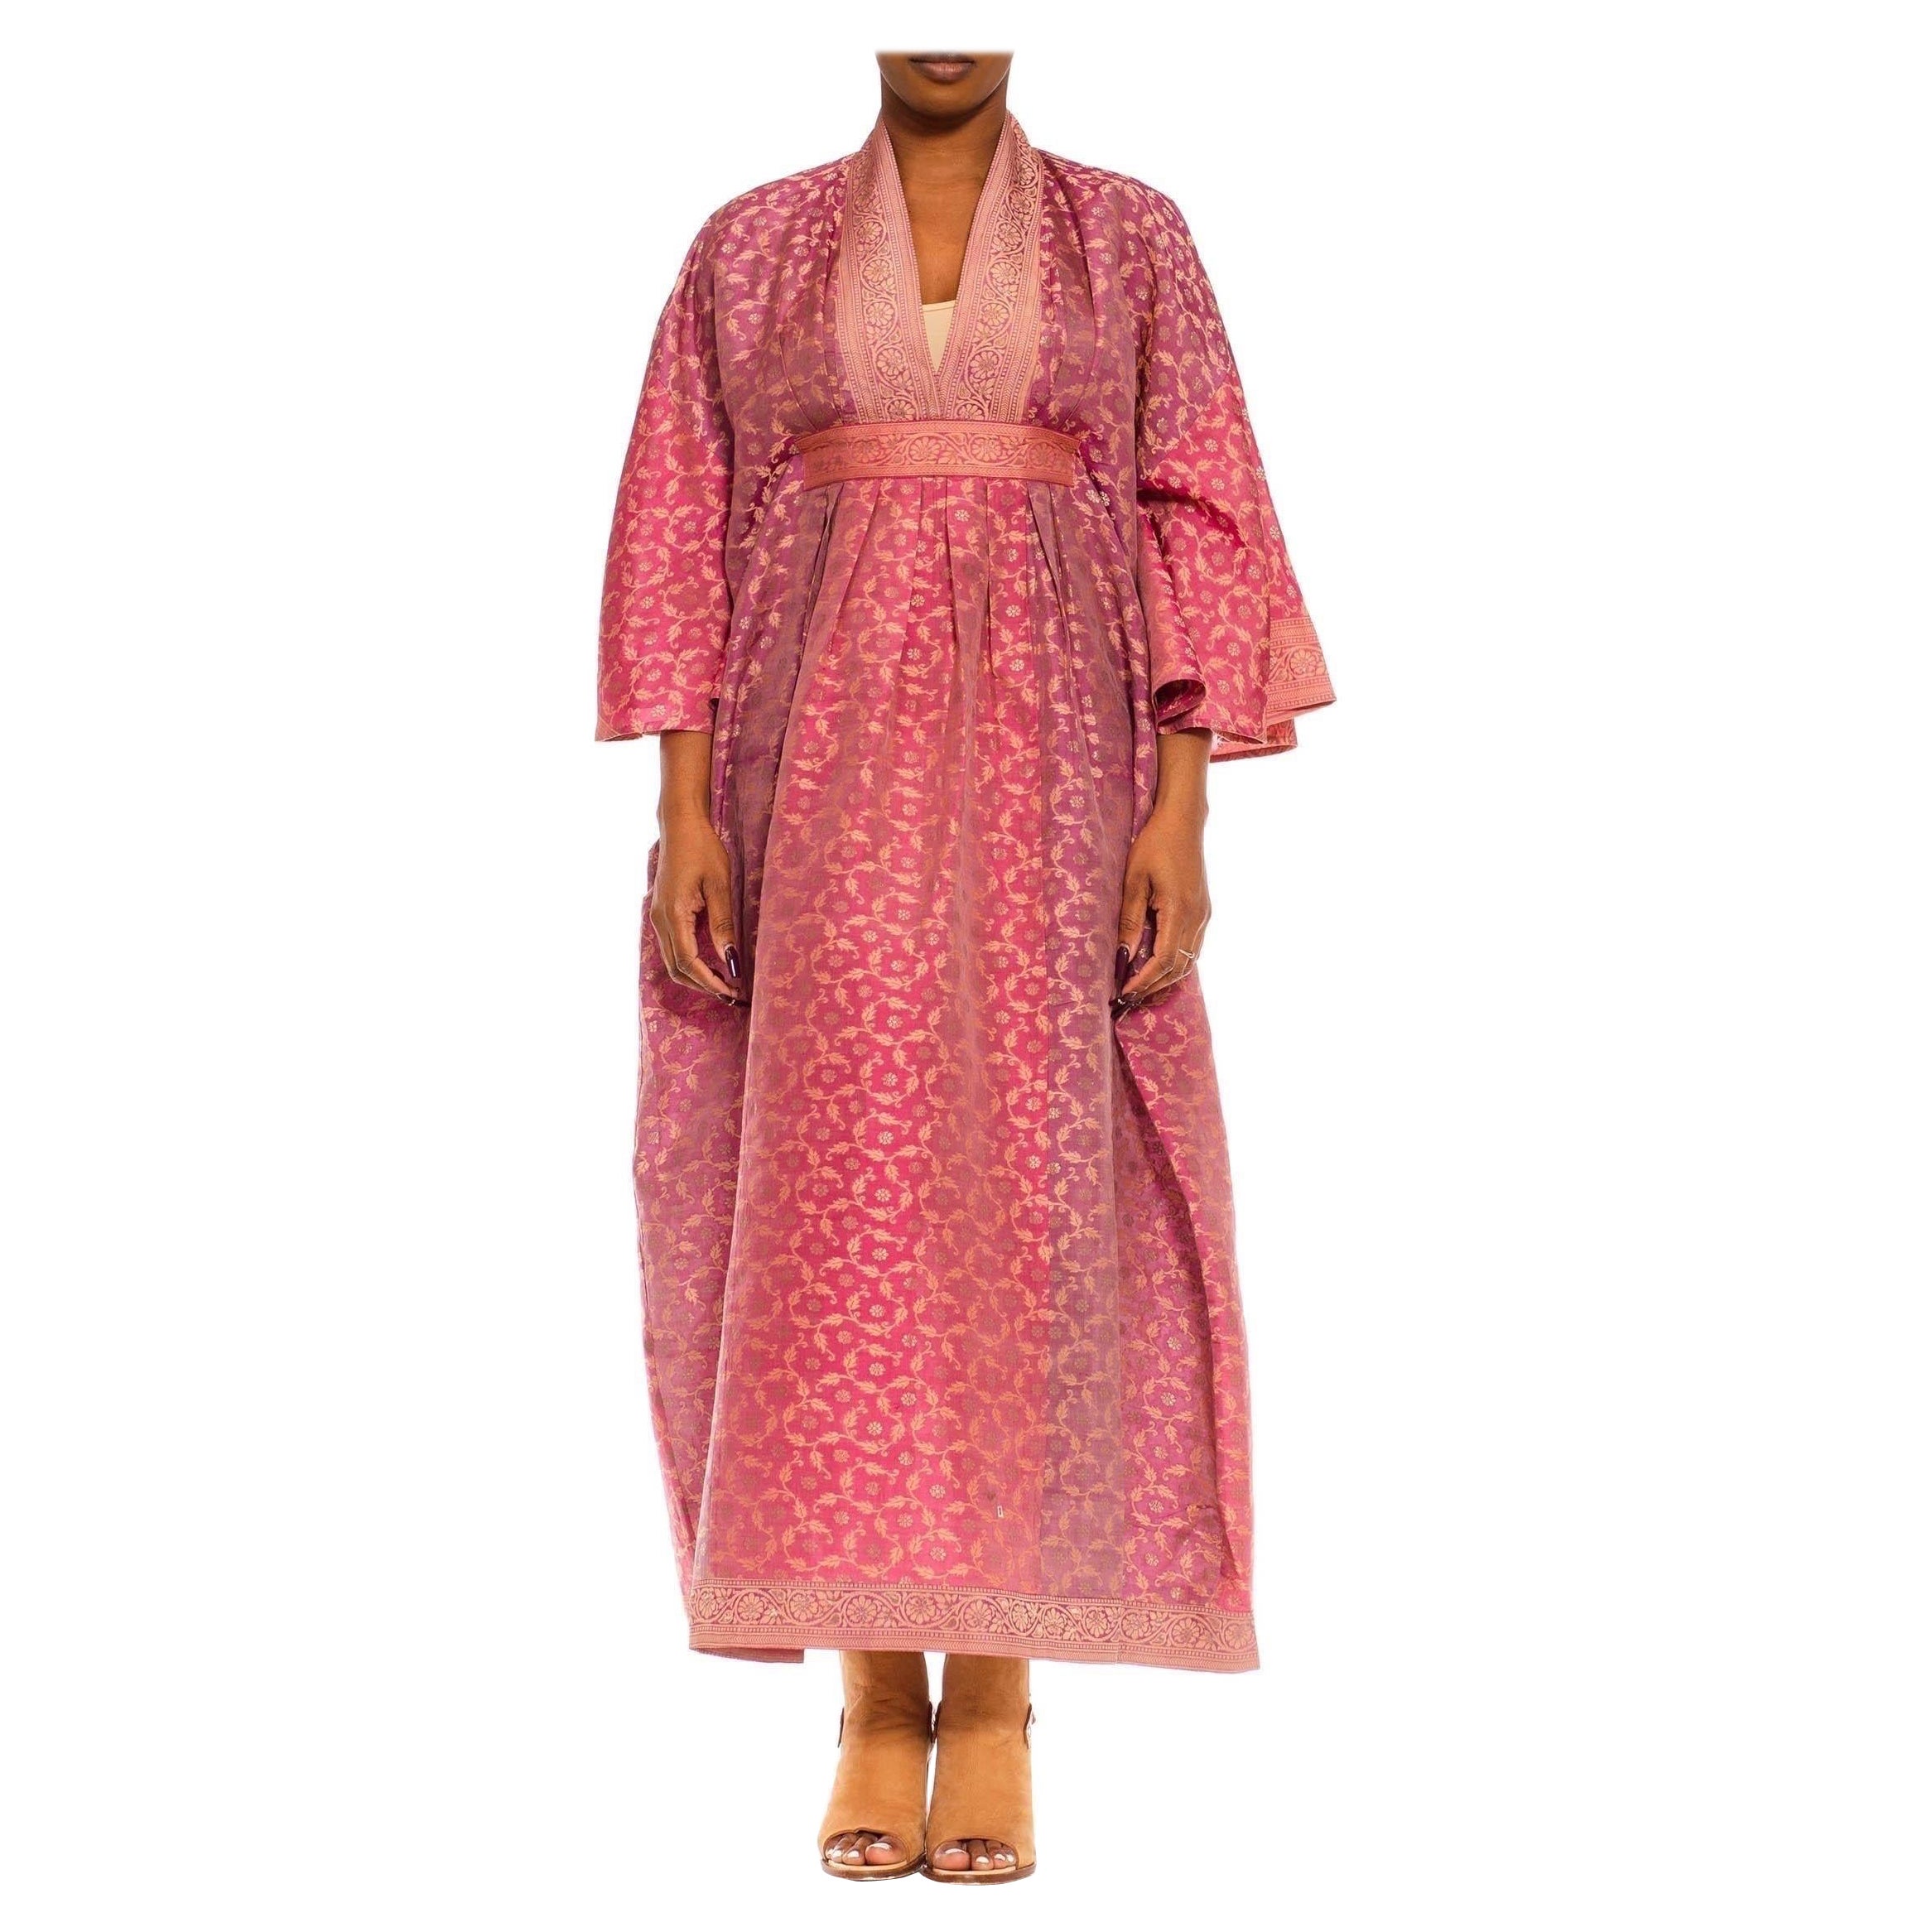 MORPHEW COLLECTION Lilac & Peach Silk Checkered Kaftan Made From Vintage Sari For Sale